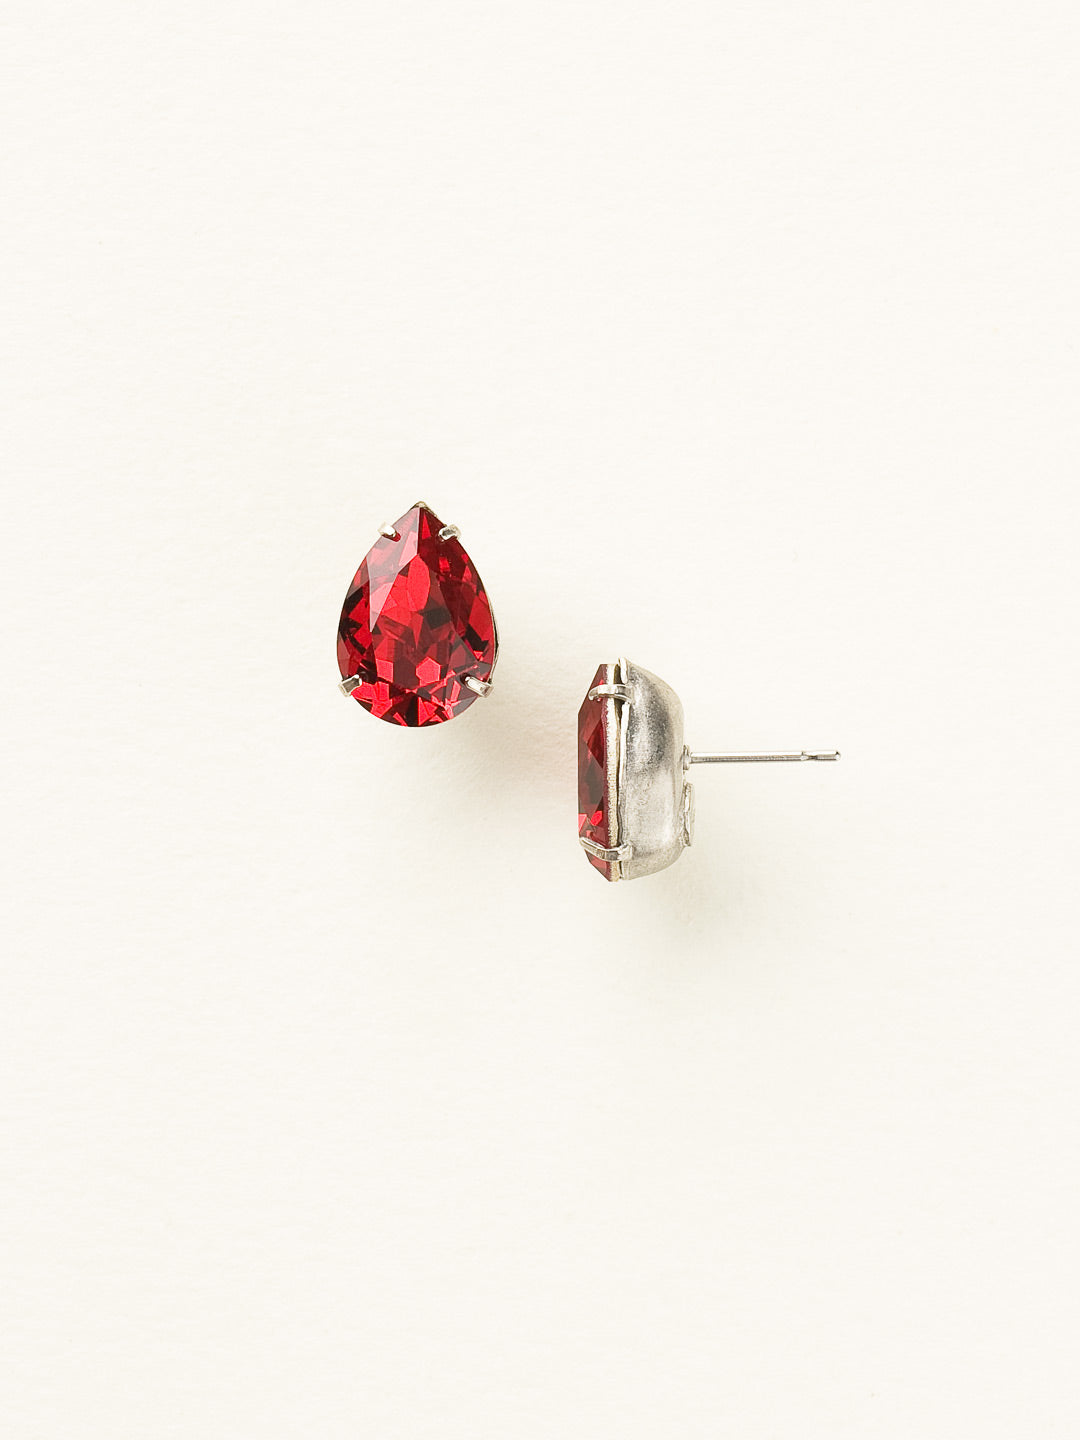 Ginnie Stud Earrings - ECR115ASPR - <p>A beautiful basic stud. These classic single teardrop post earrings are perfect for any occasion, especially the everyday look. A timeless treasure that will sparkle season after season. From Sorrelli's Pink Ruby collection in our Antique Silver-tone finish.</p>